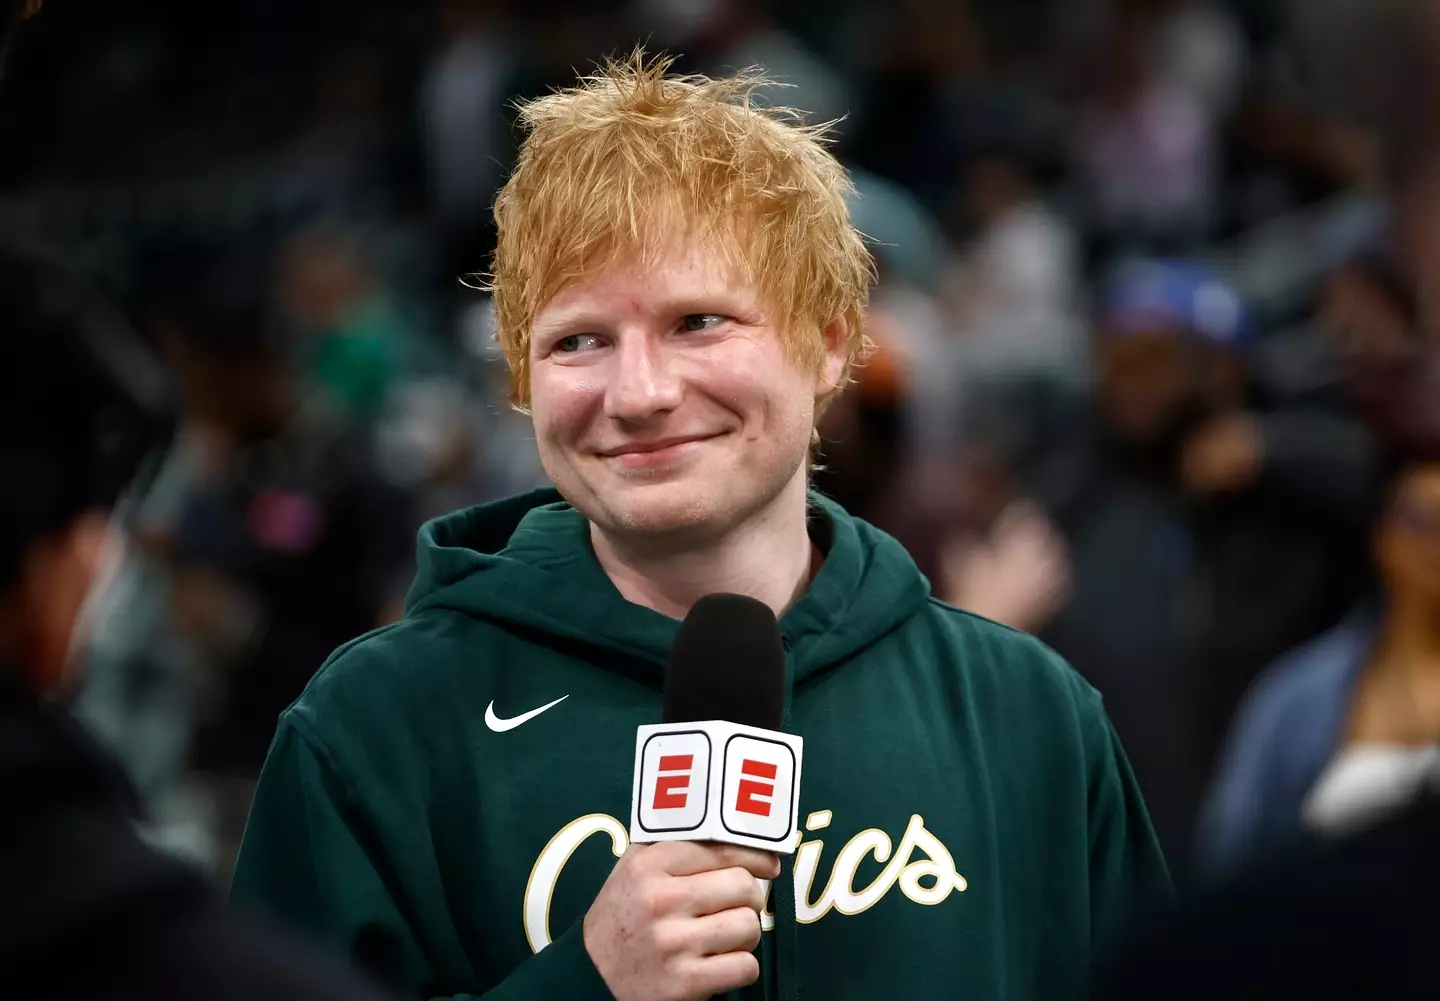 Ed Sheeran recalled meeting the King. (Winslow Townson/Getty Images)